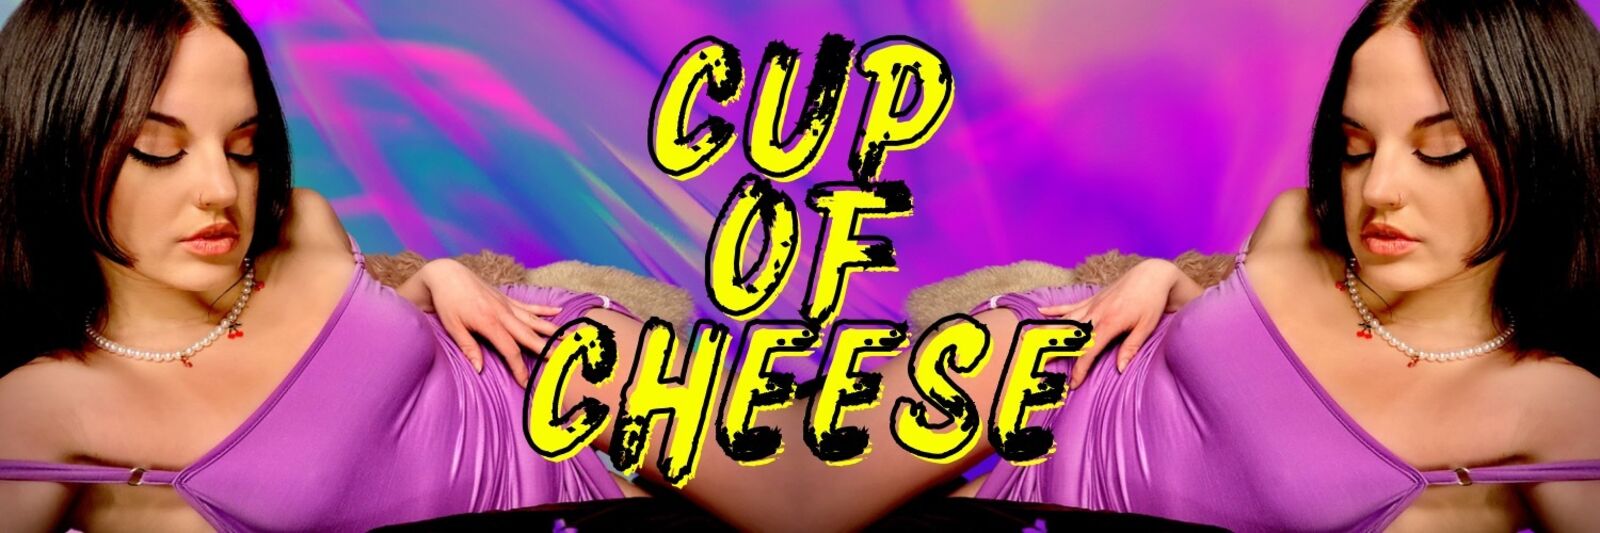 cupofcheese